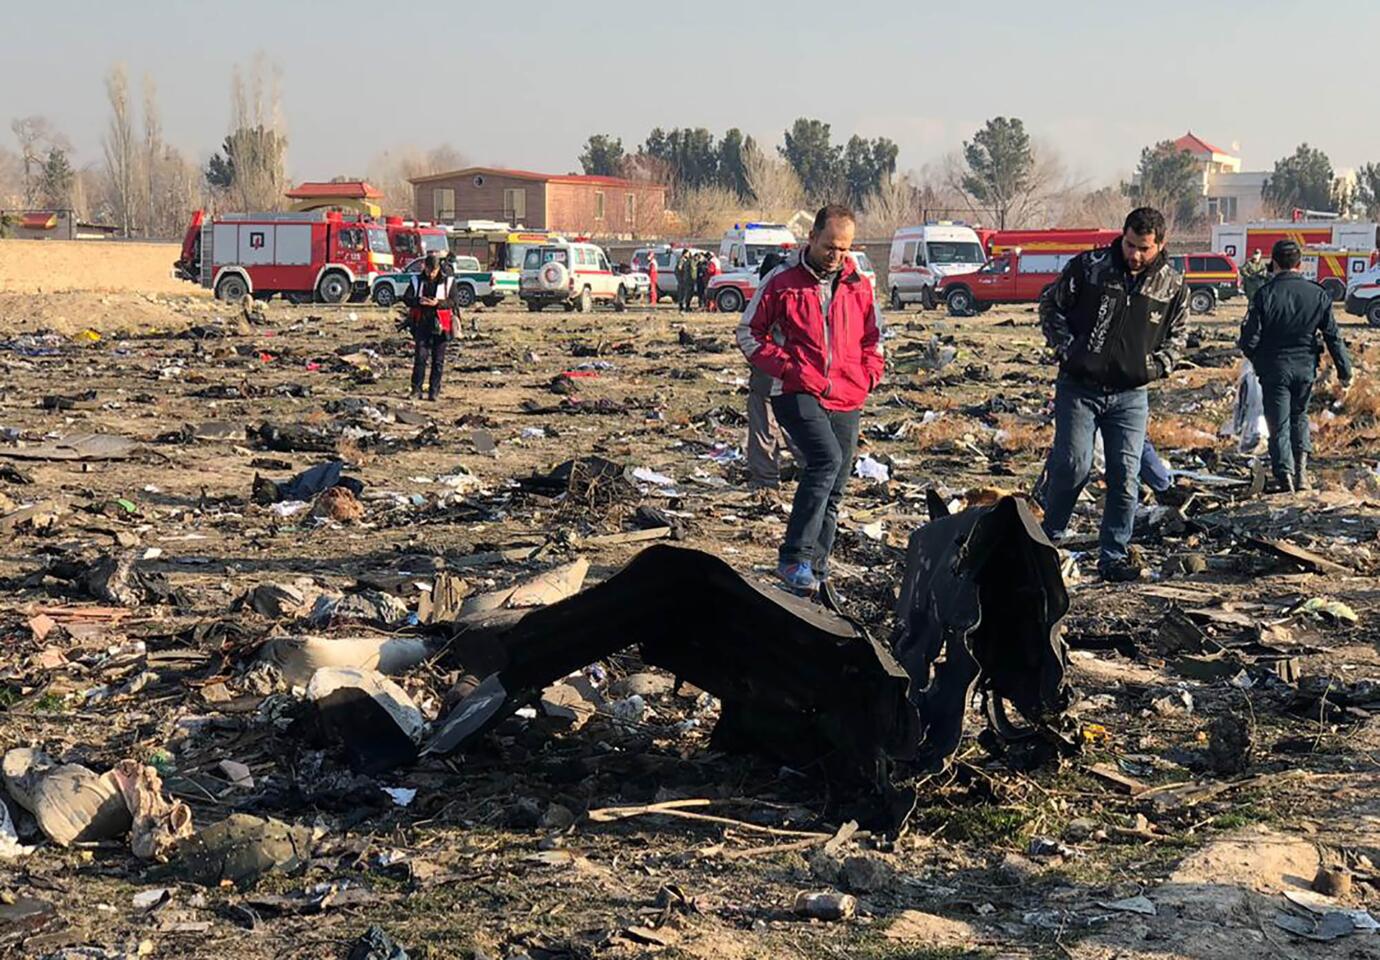 People walk near the plane wreckage on Wednesday. The majority of the 176 passengers were Iranian nationals, Russia's RIA Novosti agency reported, citing Iranian authorities.